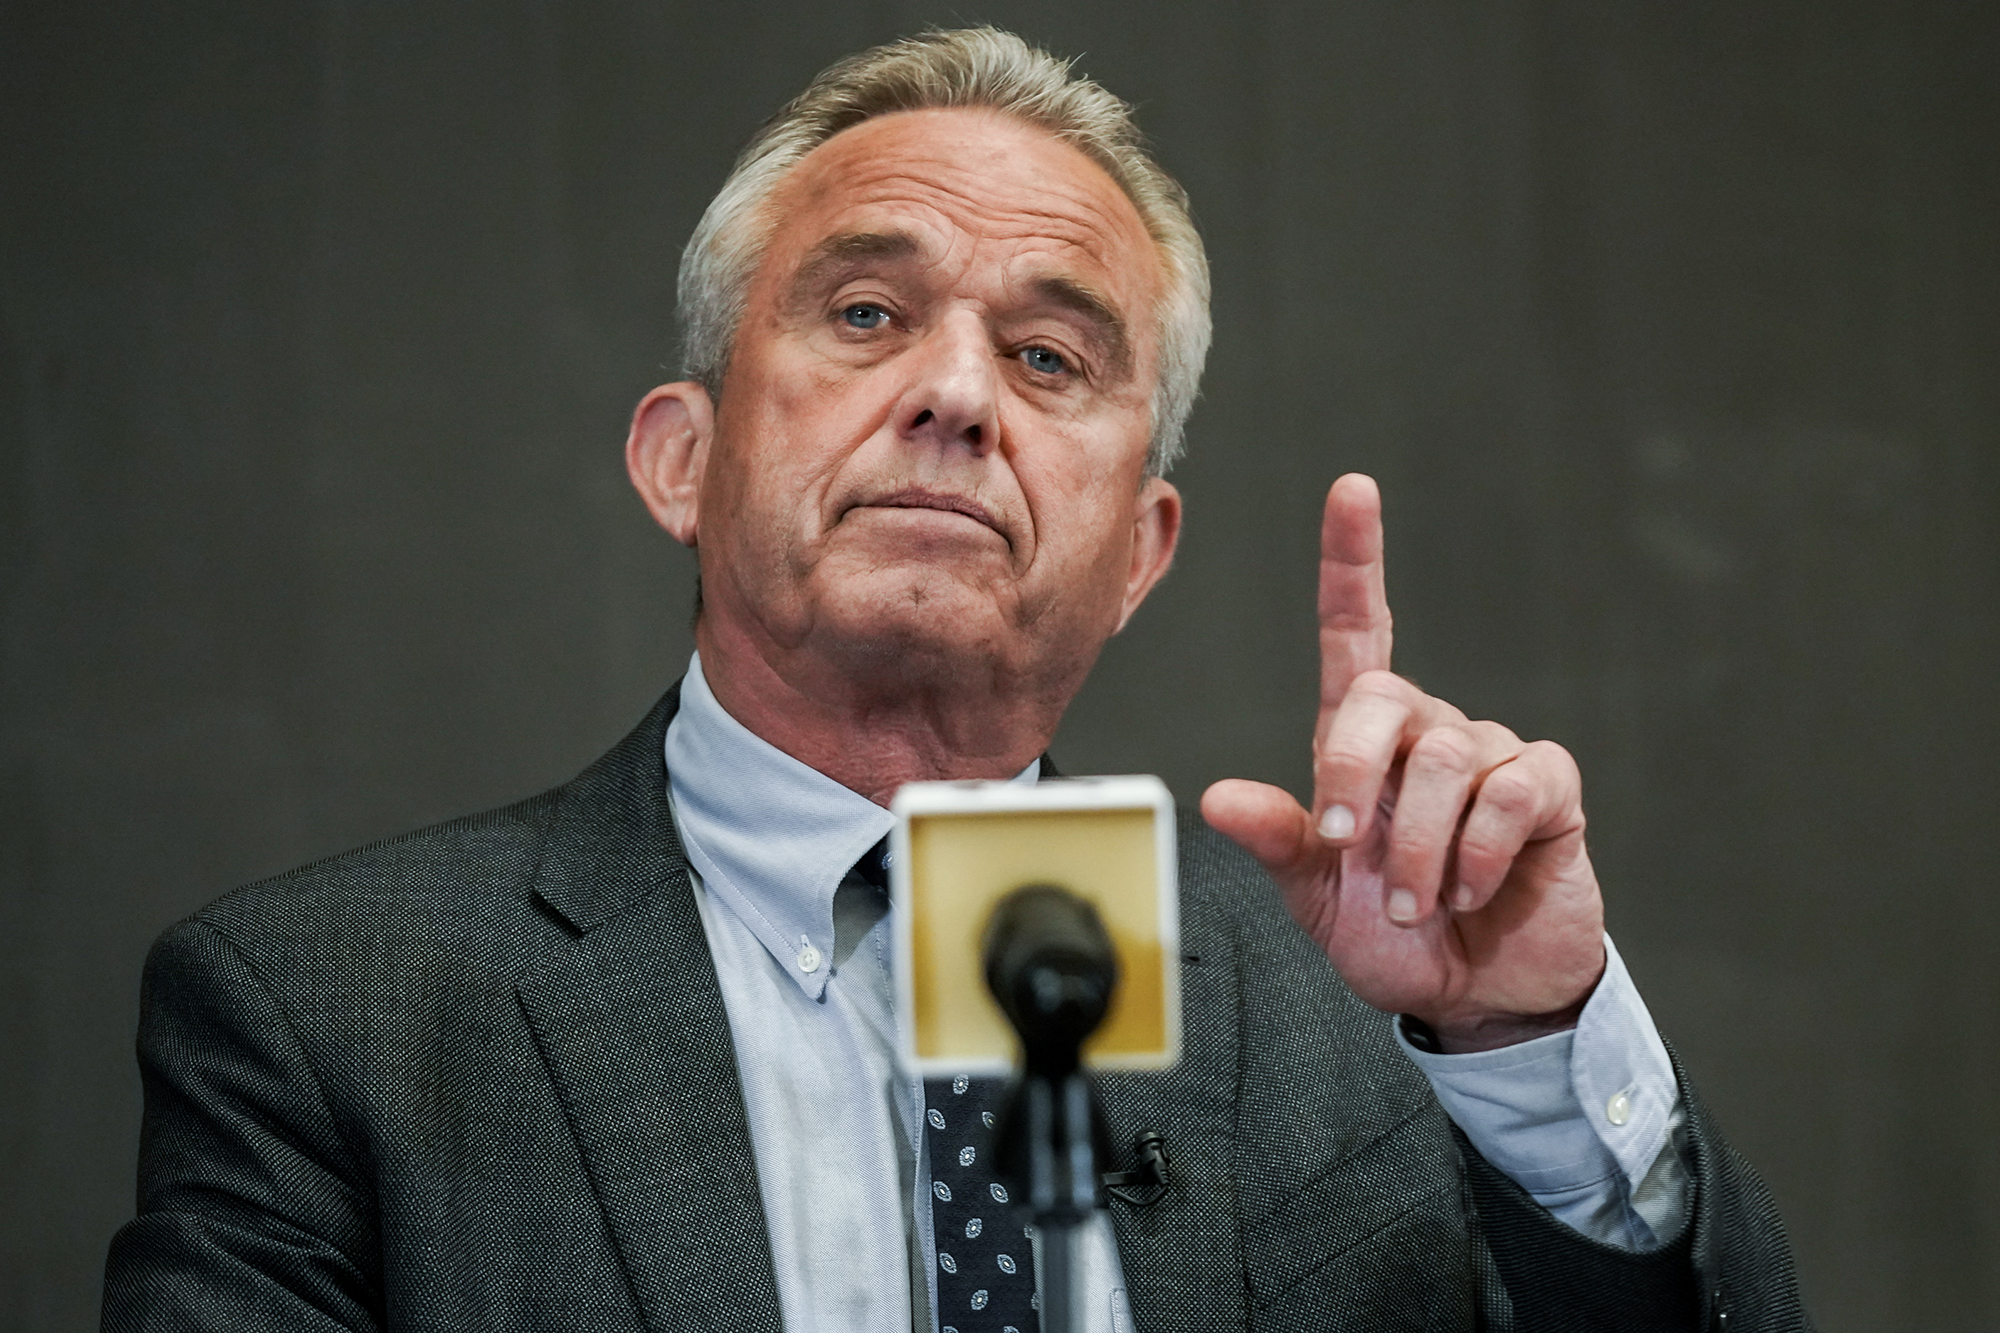 How Robert F. Kennedy Jr., His Presidential Candidacy and Vaccine Views ...